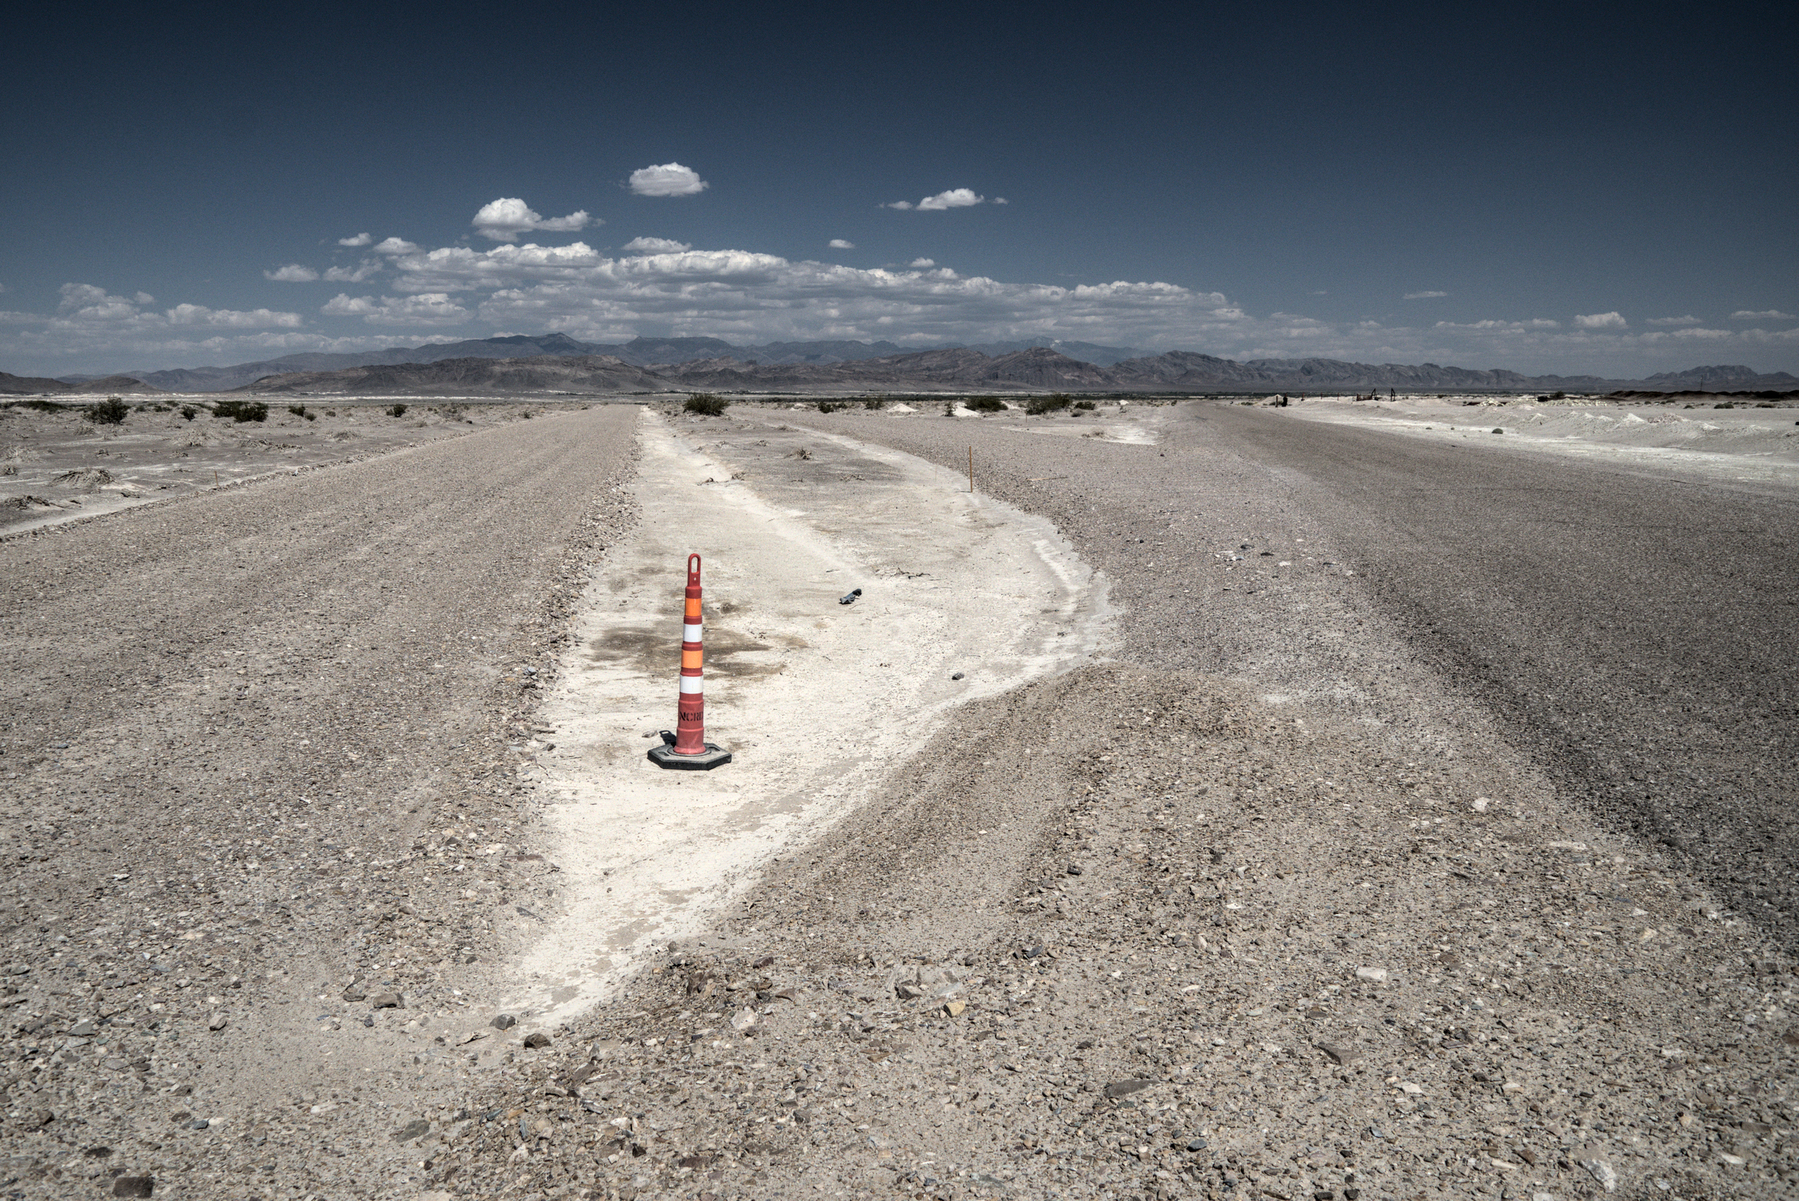 A skinny traffic cone marks a bit of rough white sand between two gravel roads through the desert.